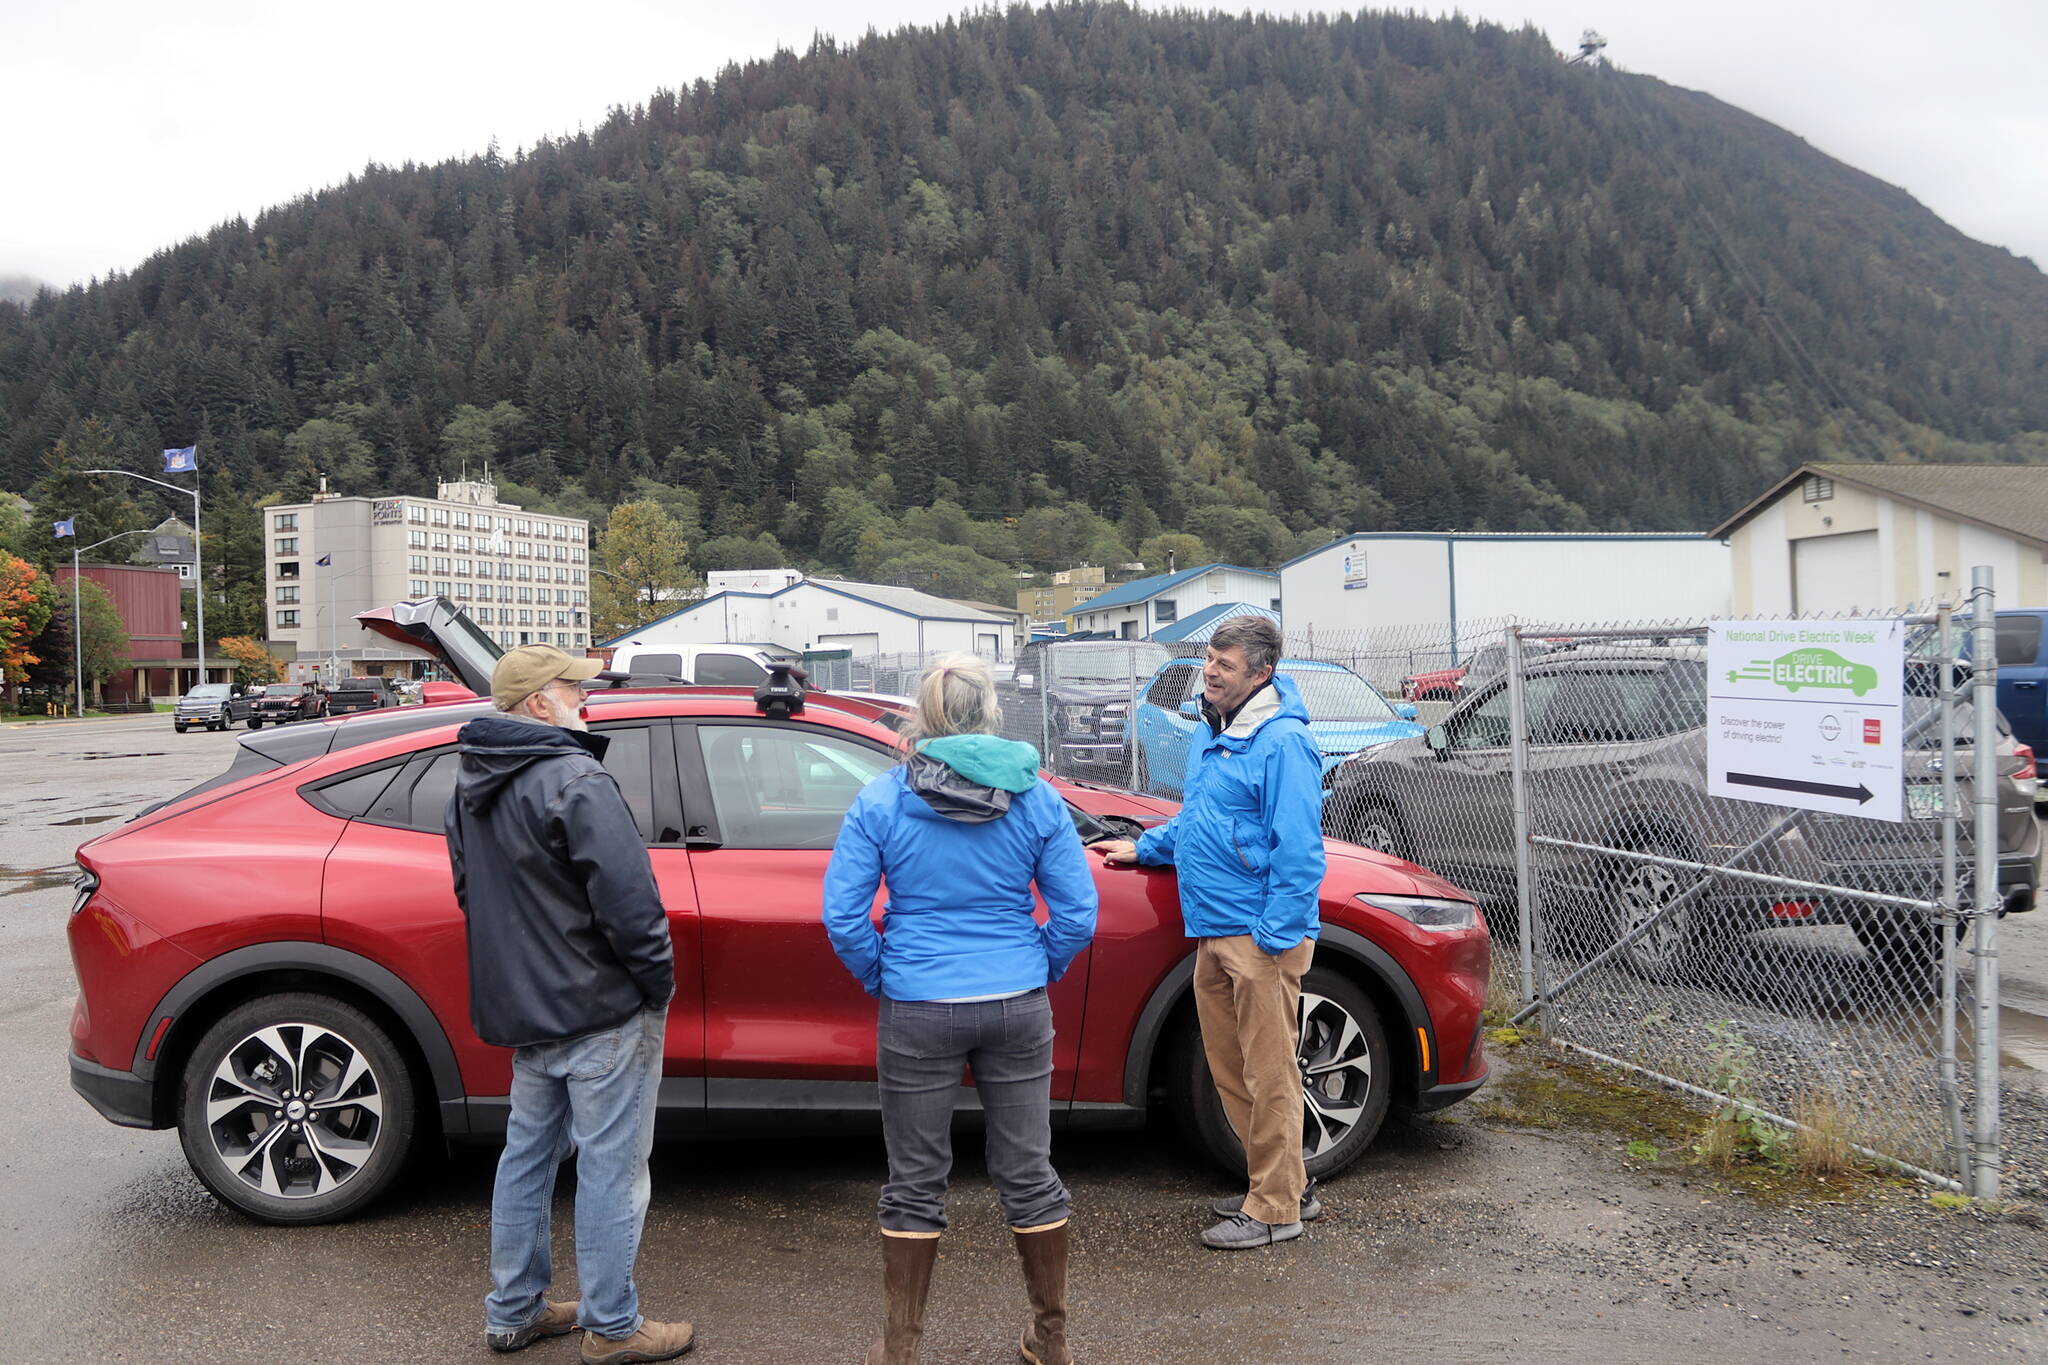 Jim Scheufelt, right, explains how his newly purchased Ford Mustang Mach-E operates to a couple of visitors at the ninth annual Juneau EV EBIKE Roundup on Saturday. He said he has always driven Fords because his father worked for the company, but decided this year to make the switch from gas to electric. He said his wife drives a similar model and their son an electric Ford Focus, making them “an all-EV household.” (Mark Sabbatini / Juneau Empire)